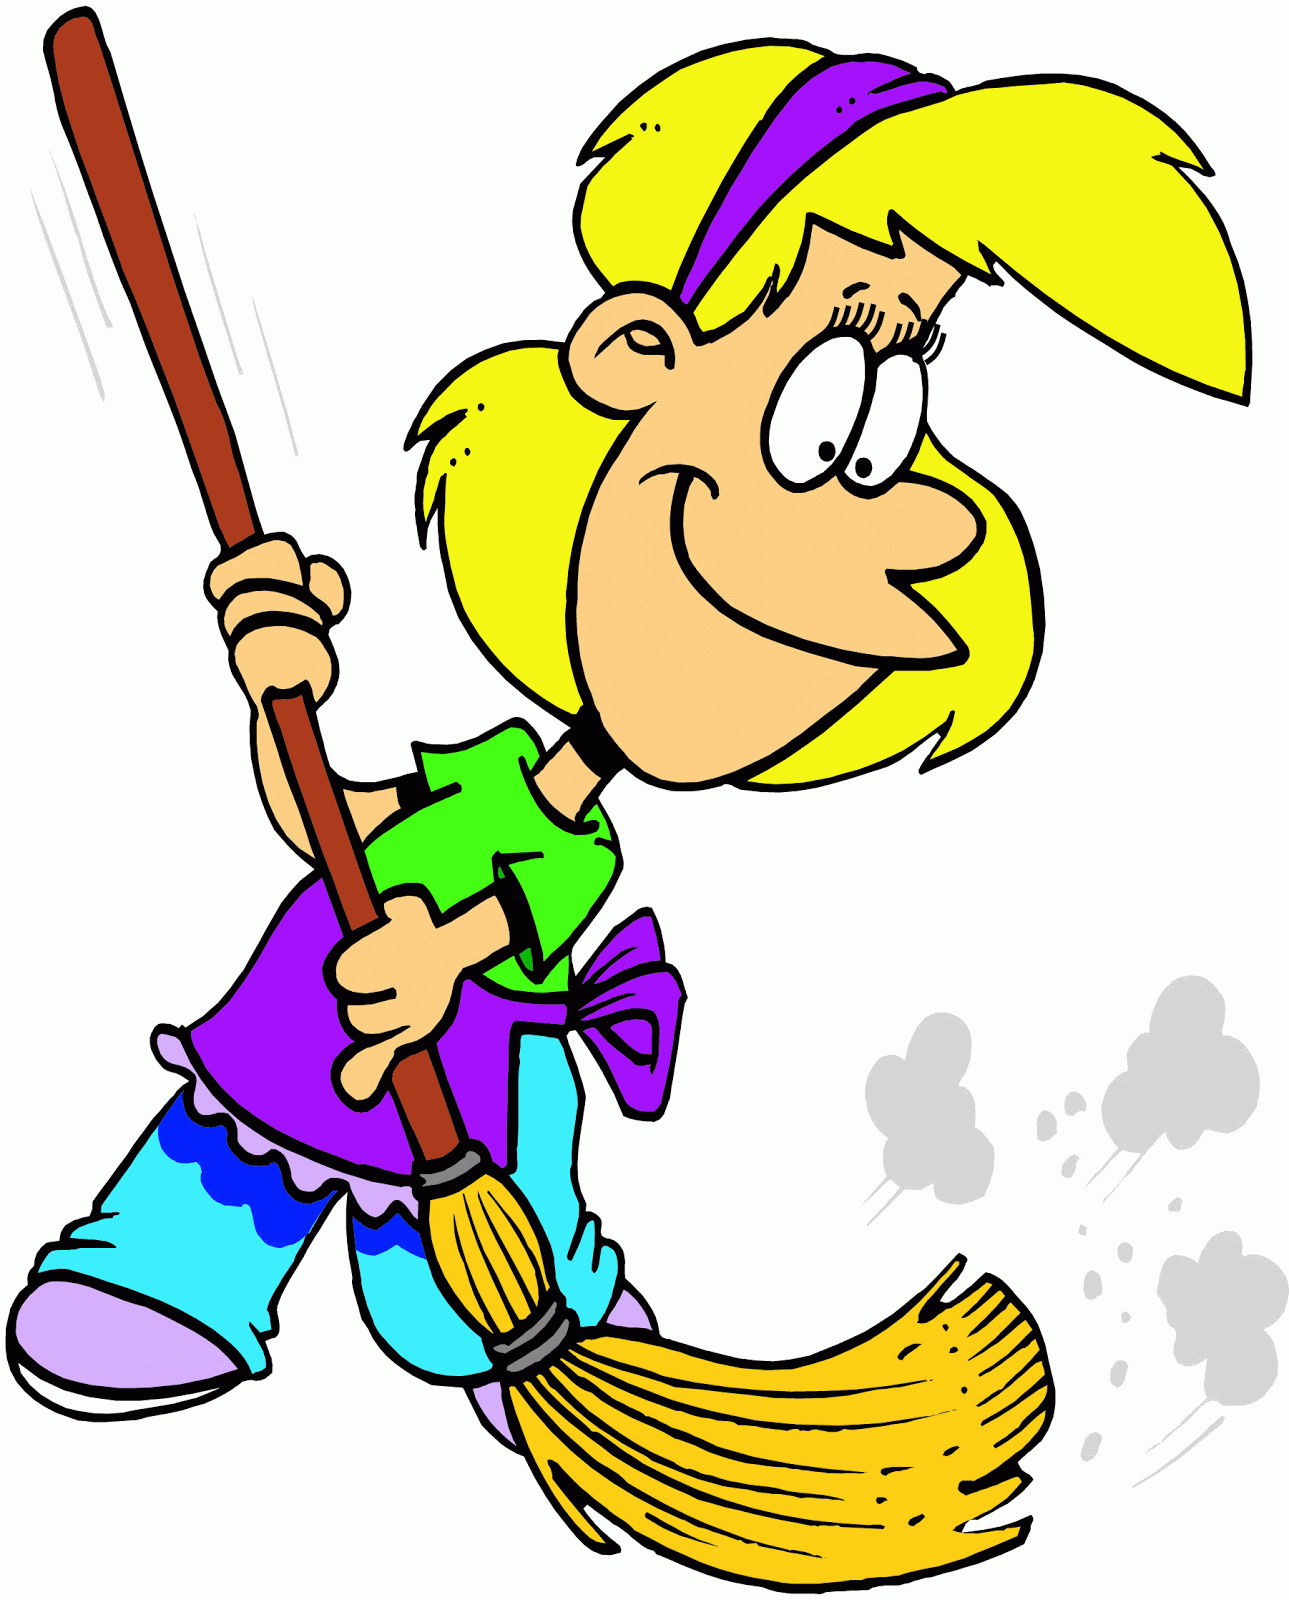 House Cleaning Cartoons